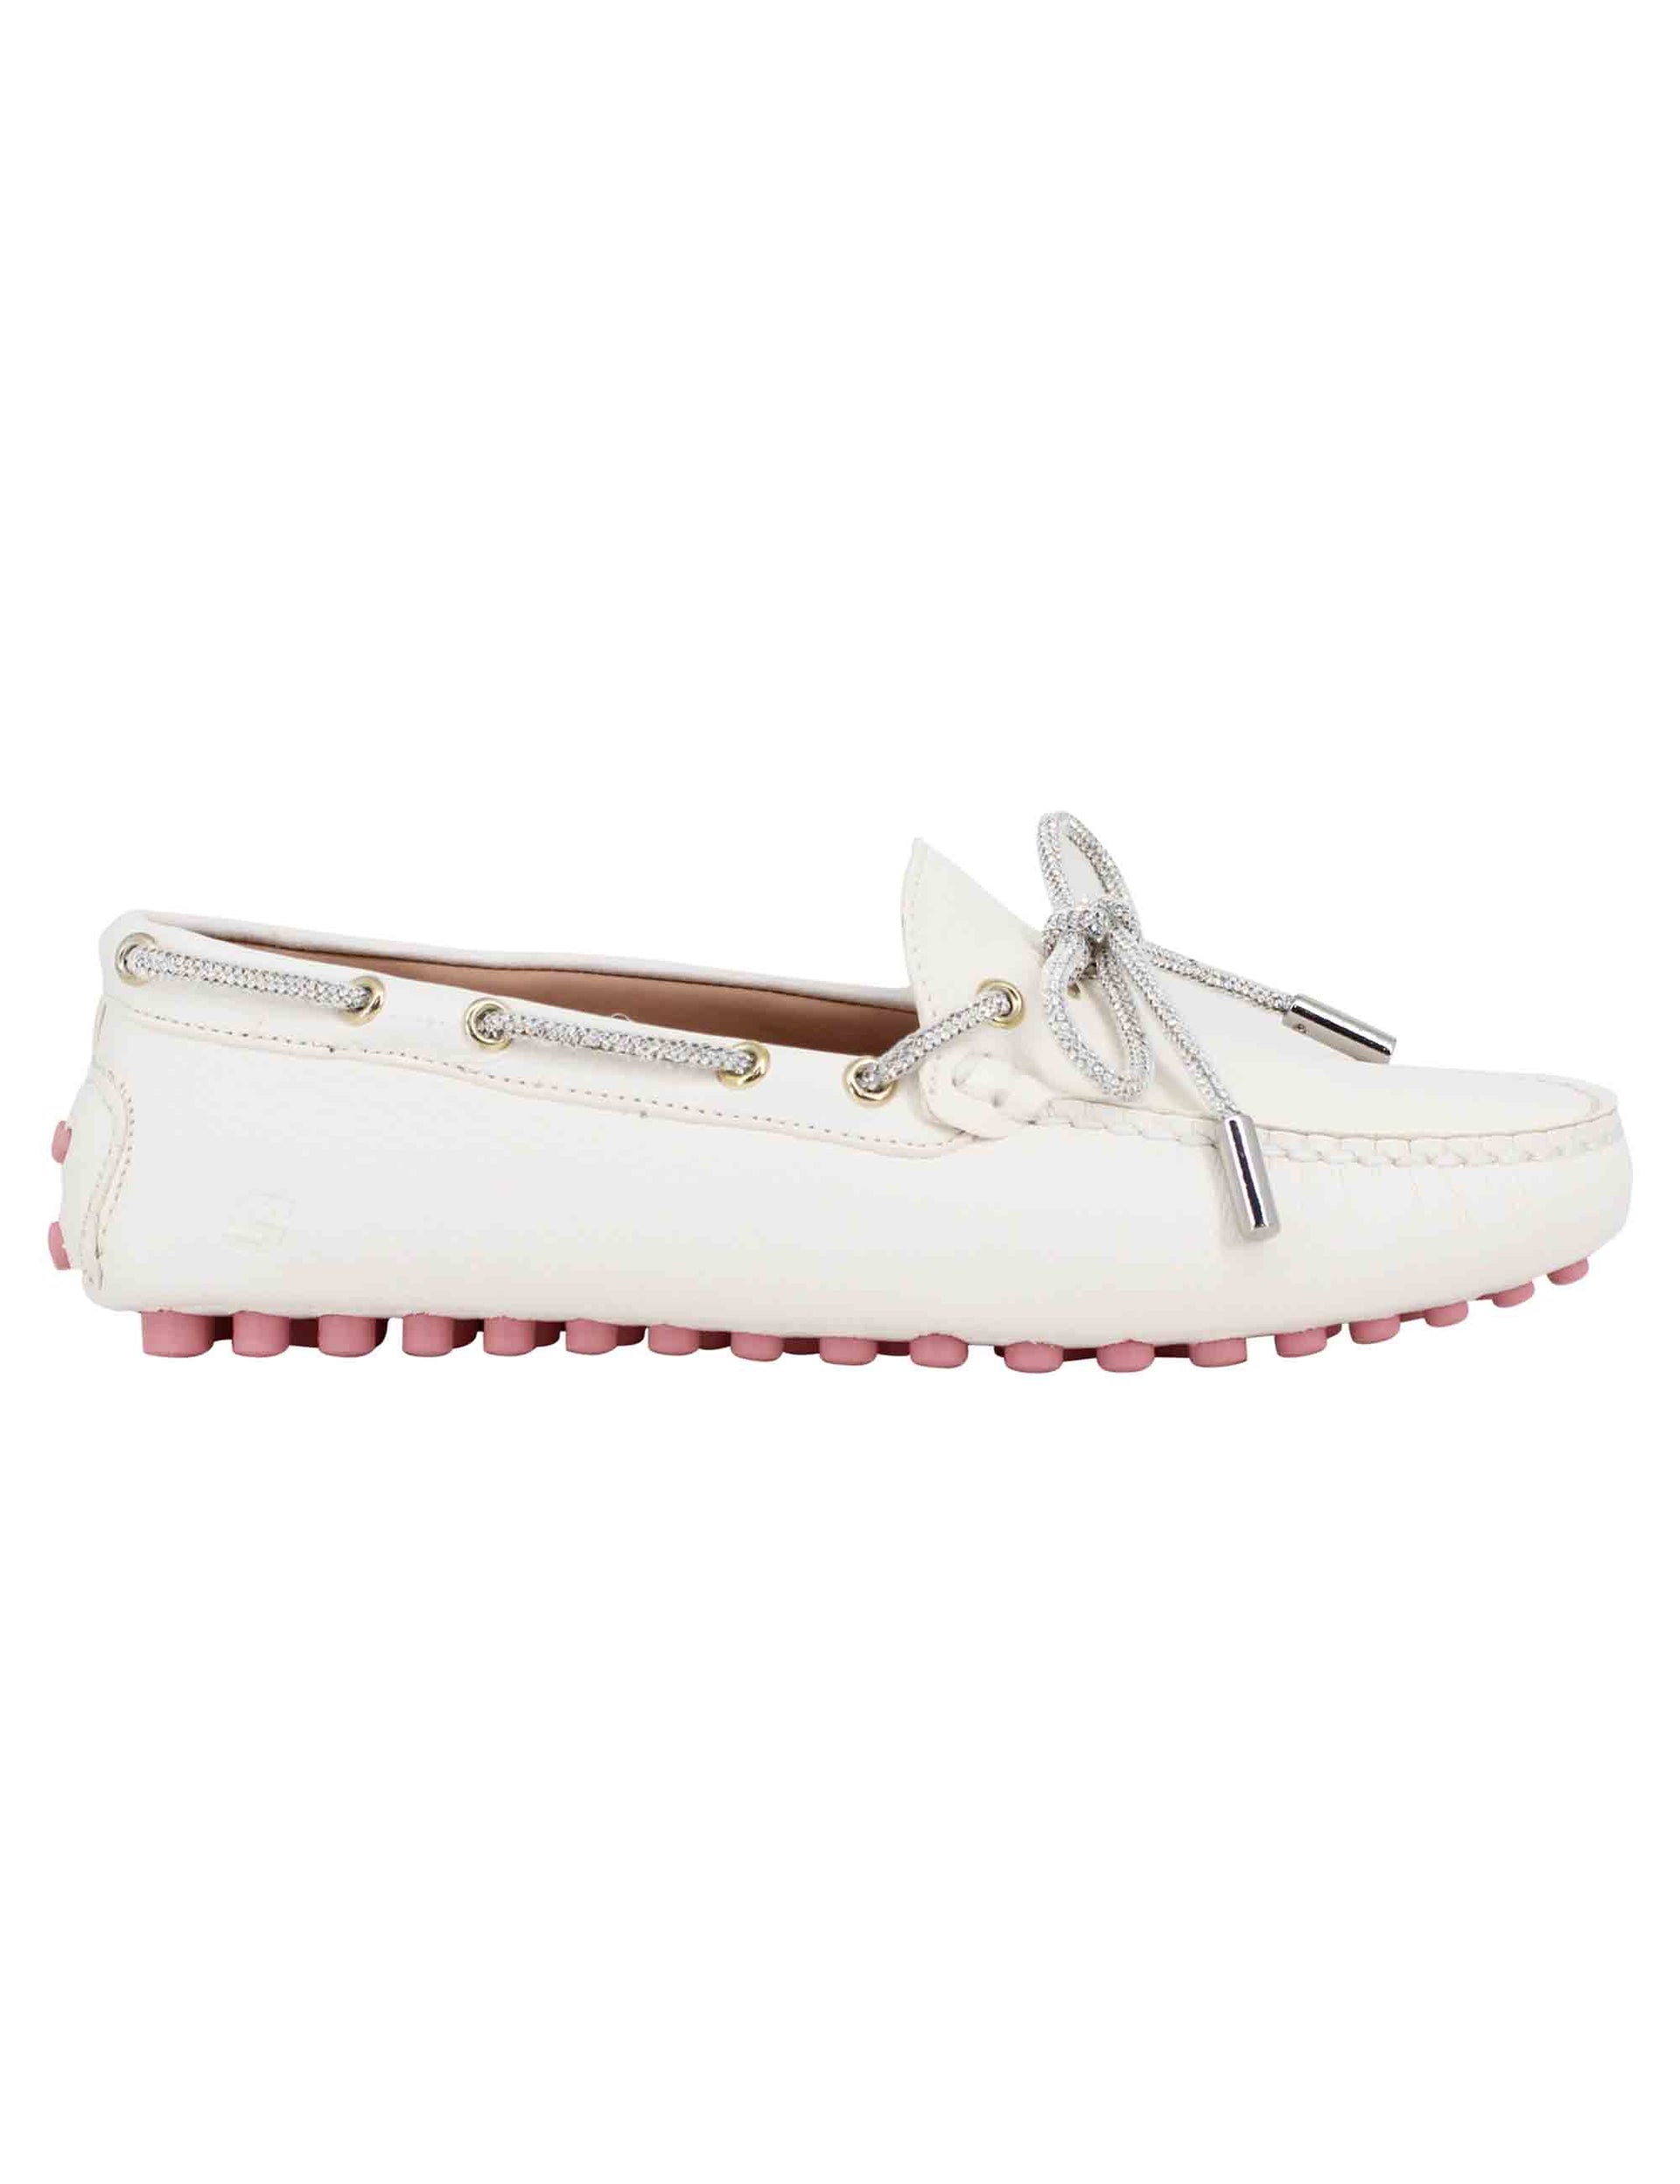 Women's white leather loafers with rhinestone bow